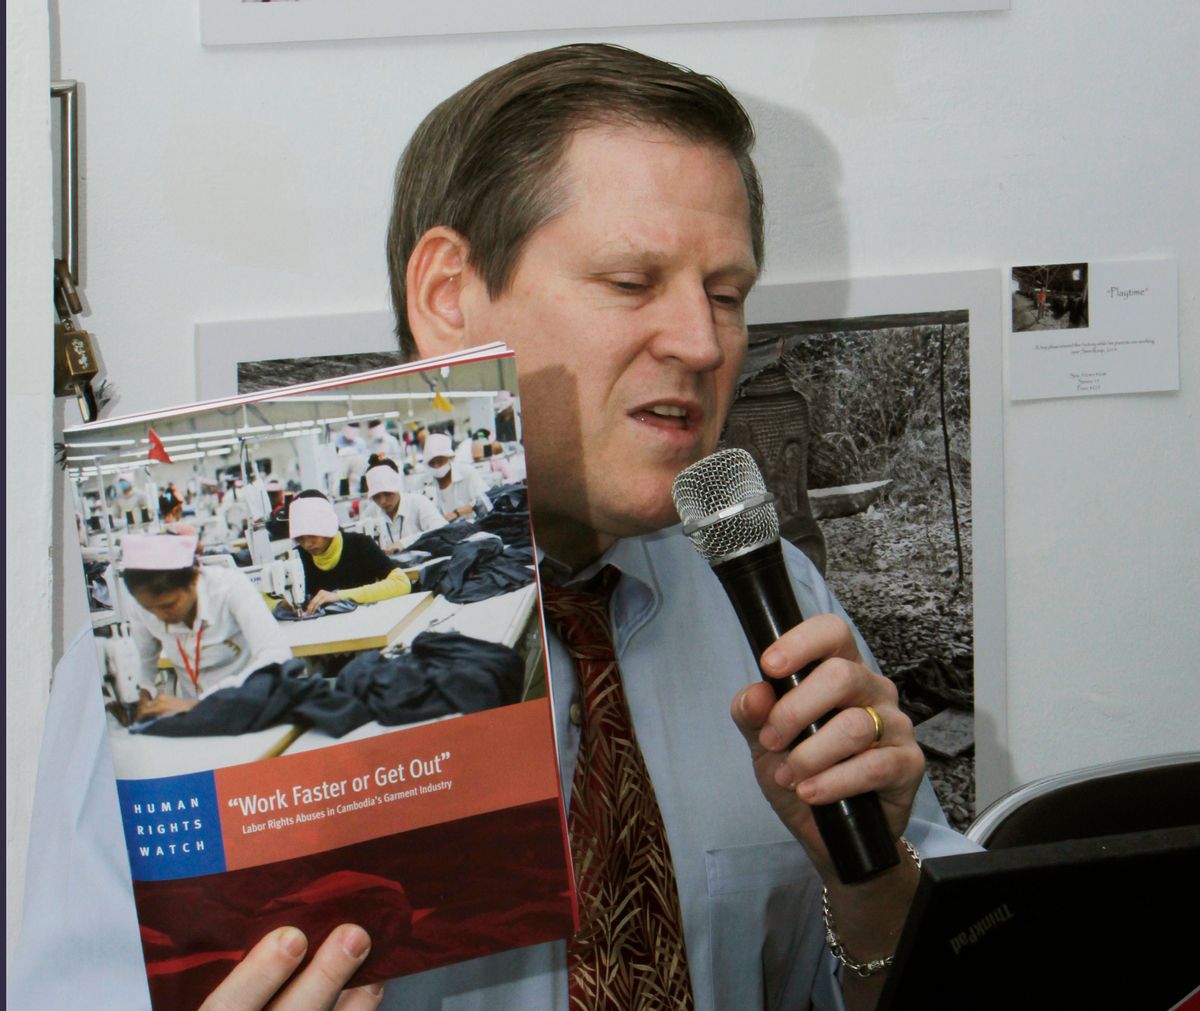 Phil Robertson, deputy director of Human Rights Watch's Asia division, speaks while showing its report during a press conference in Phnom Penh, Cambodia Thursday, March 12, 2015. Leading clothing retailers such as Gap and H&M need to help alleviate labor abuses at factories in Cambodia that manufacture their products, the New York-based human rights organization said. (AP Photo/Heng Sinith)  (Heng Sinith)